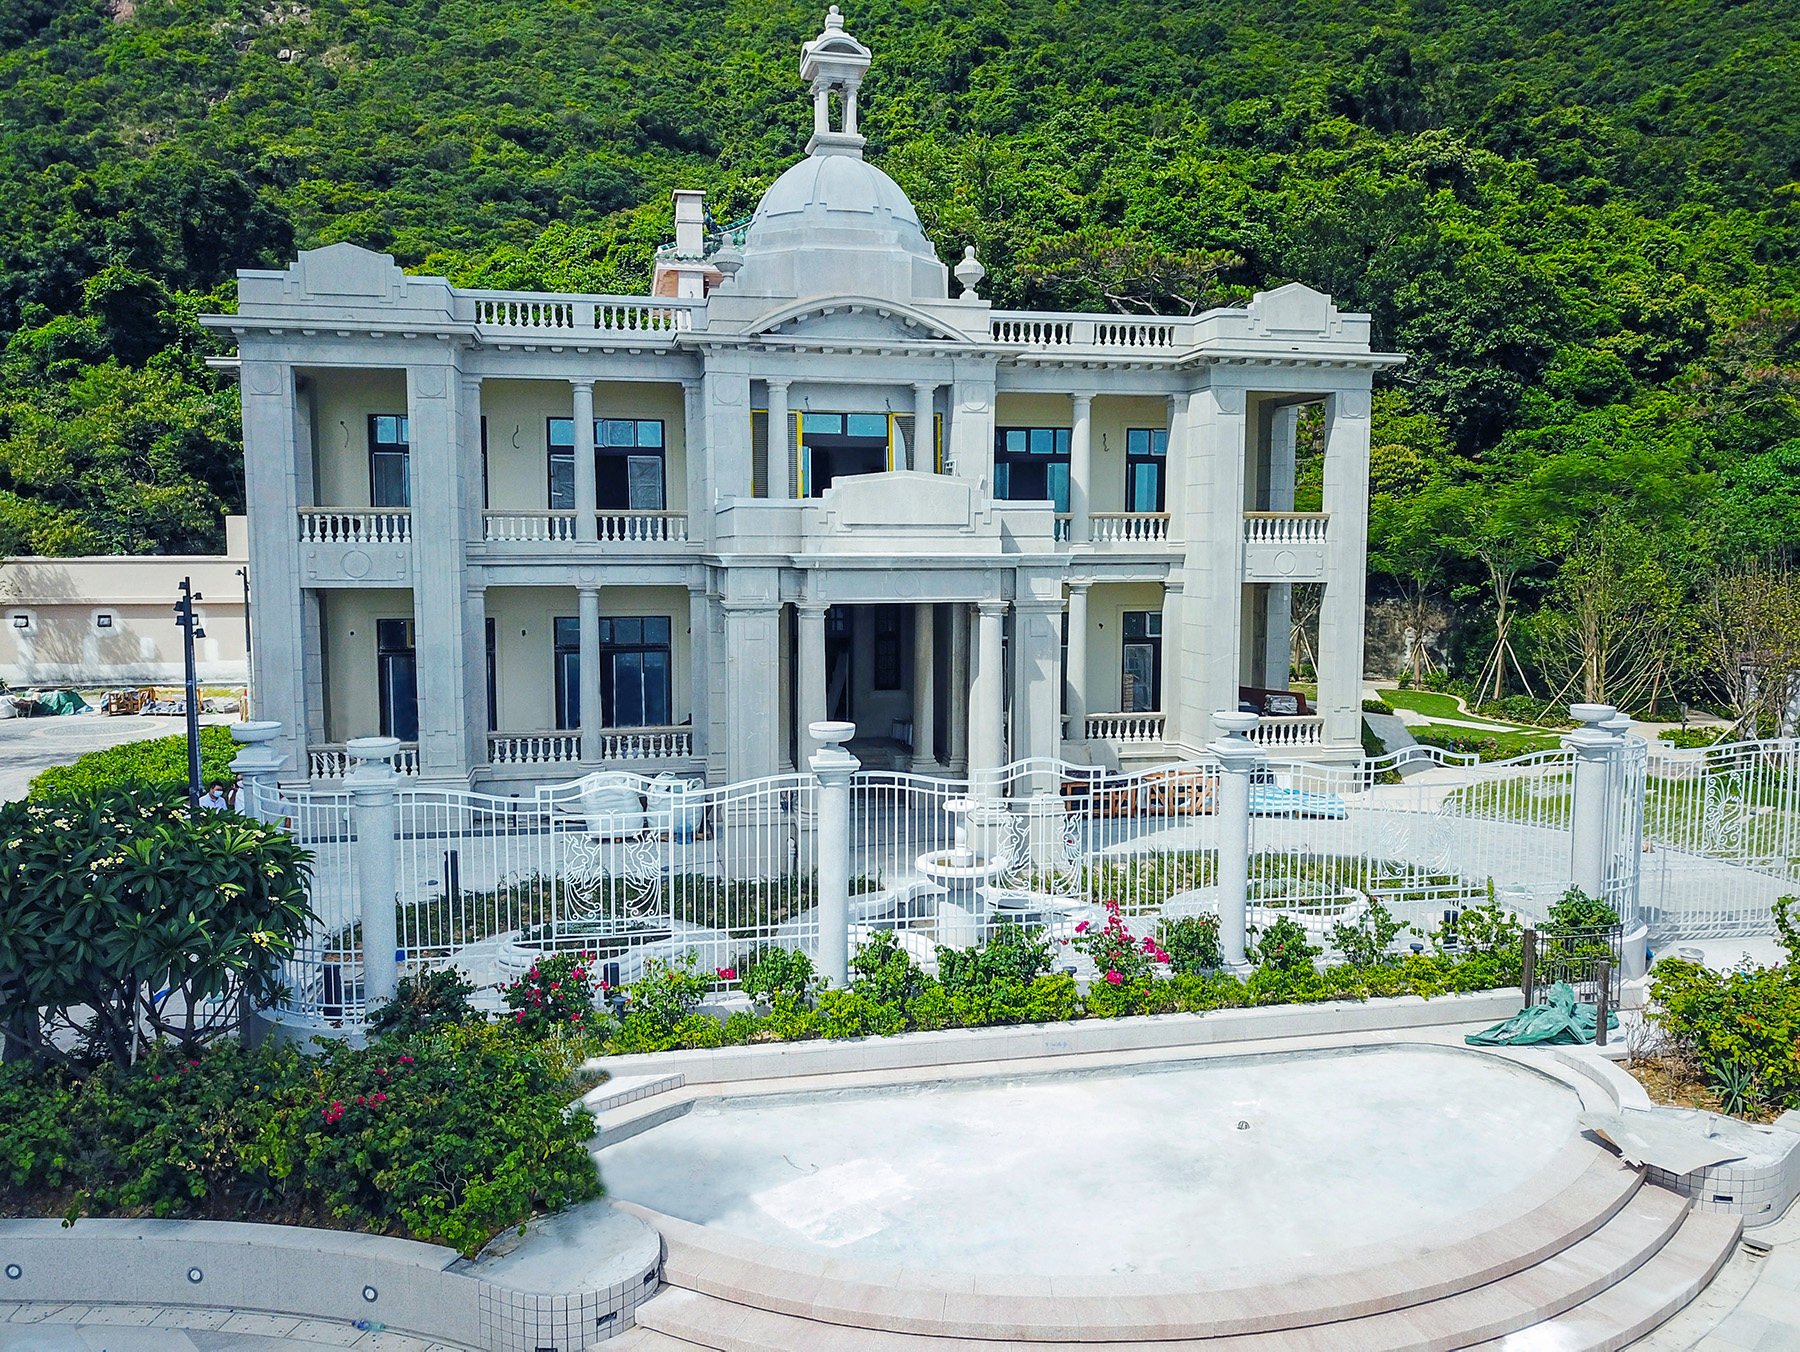 The 90-year-old converted mansion, Jessville Manor, has changed hands for US$26.5 million, adding to evidence that the recent scrapping of property curbs may be starting to revive the luxury housing market. Photo: SCMP Handout